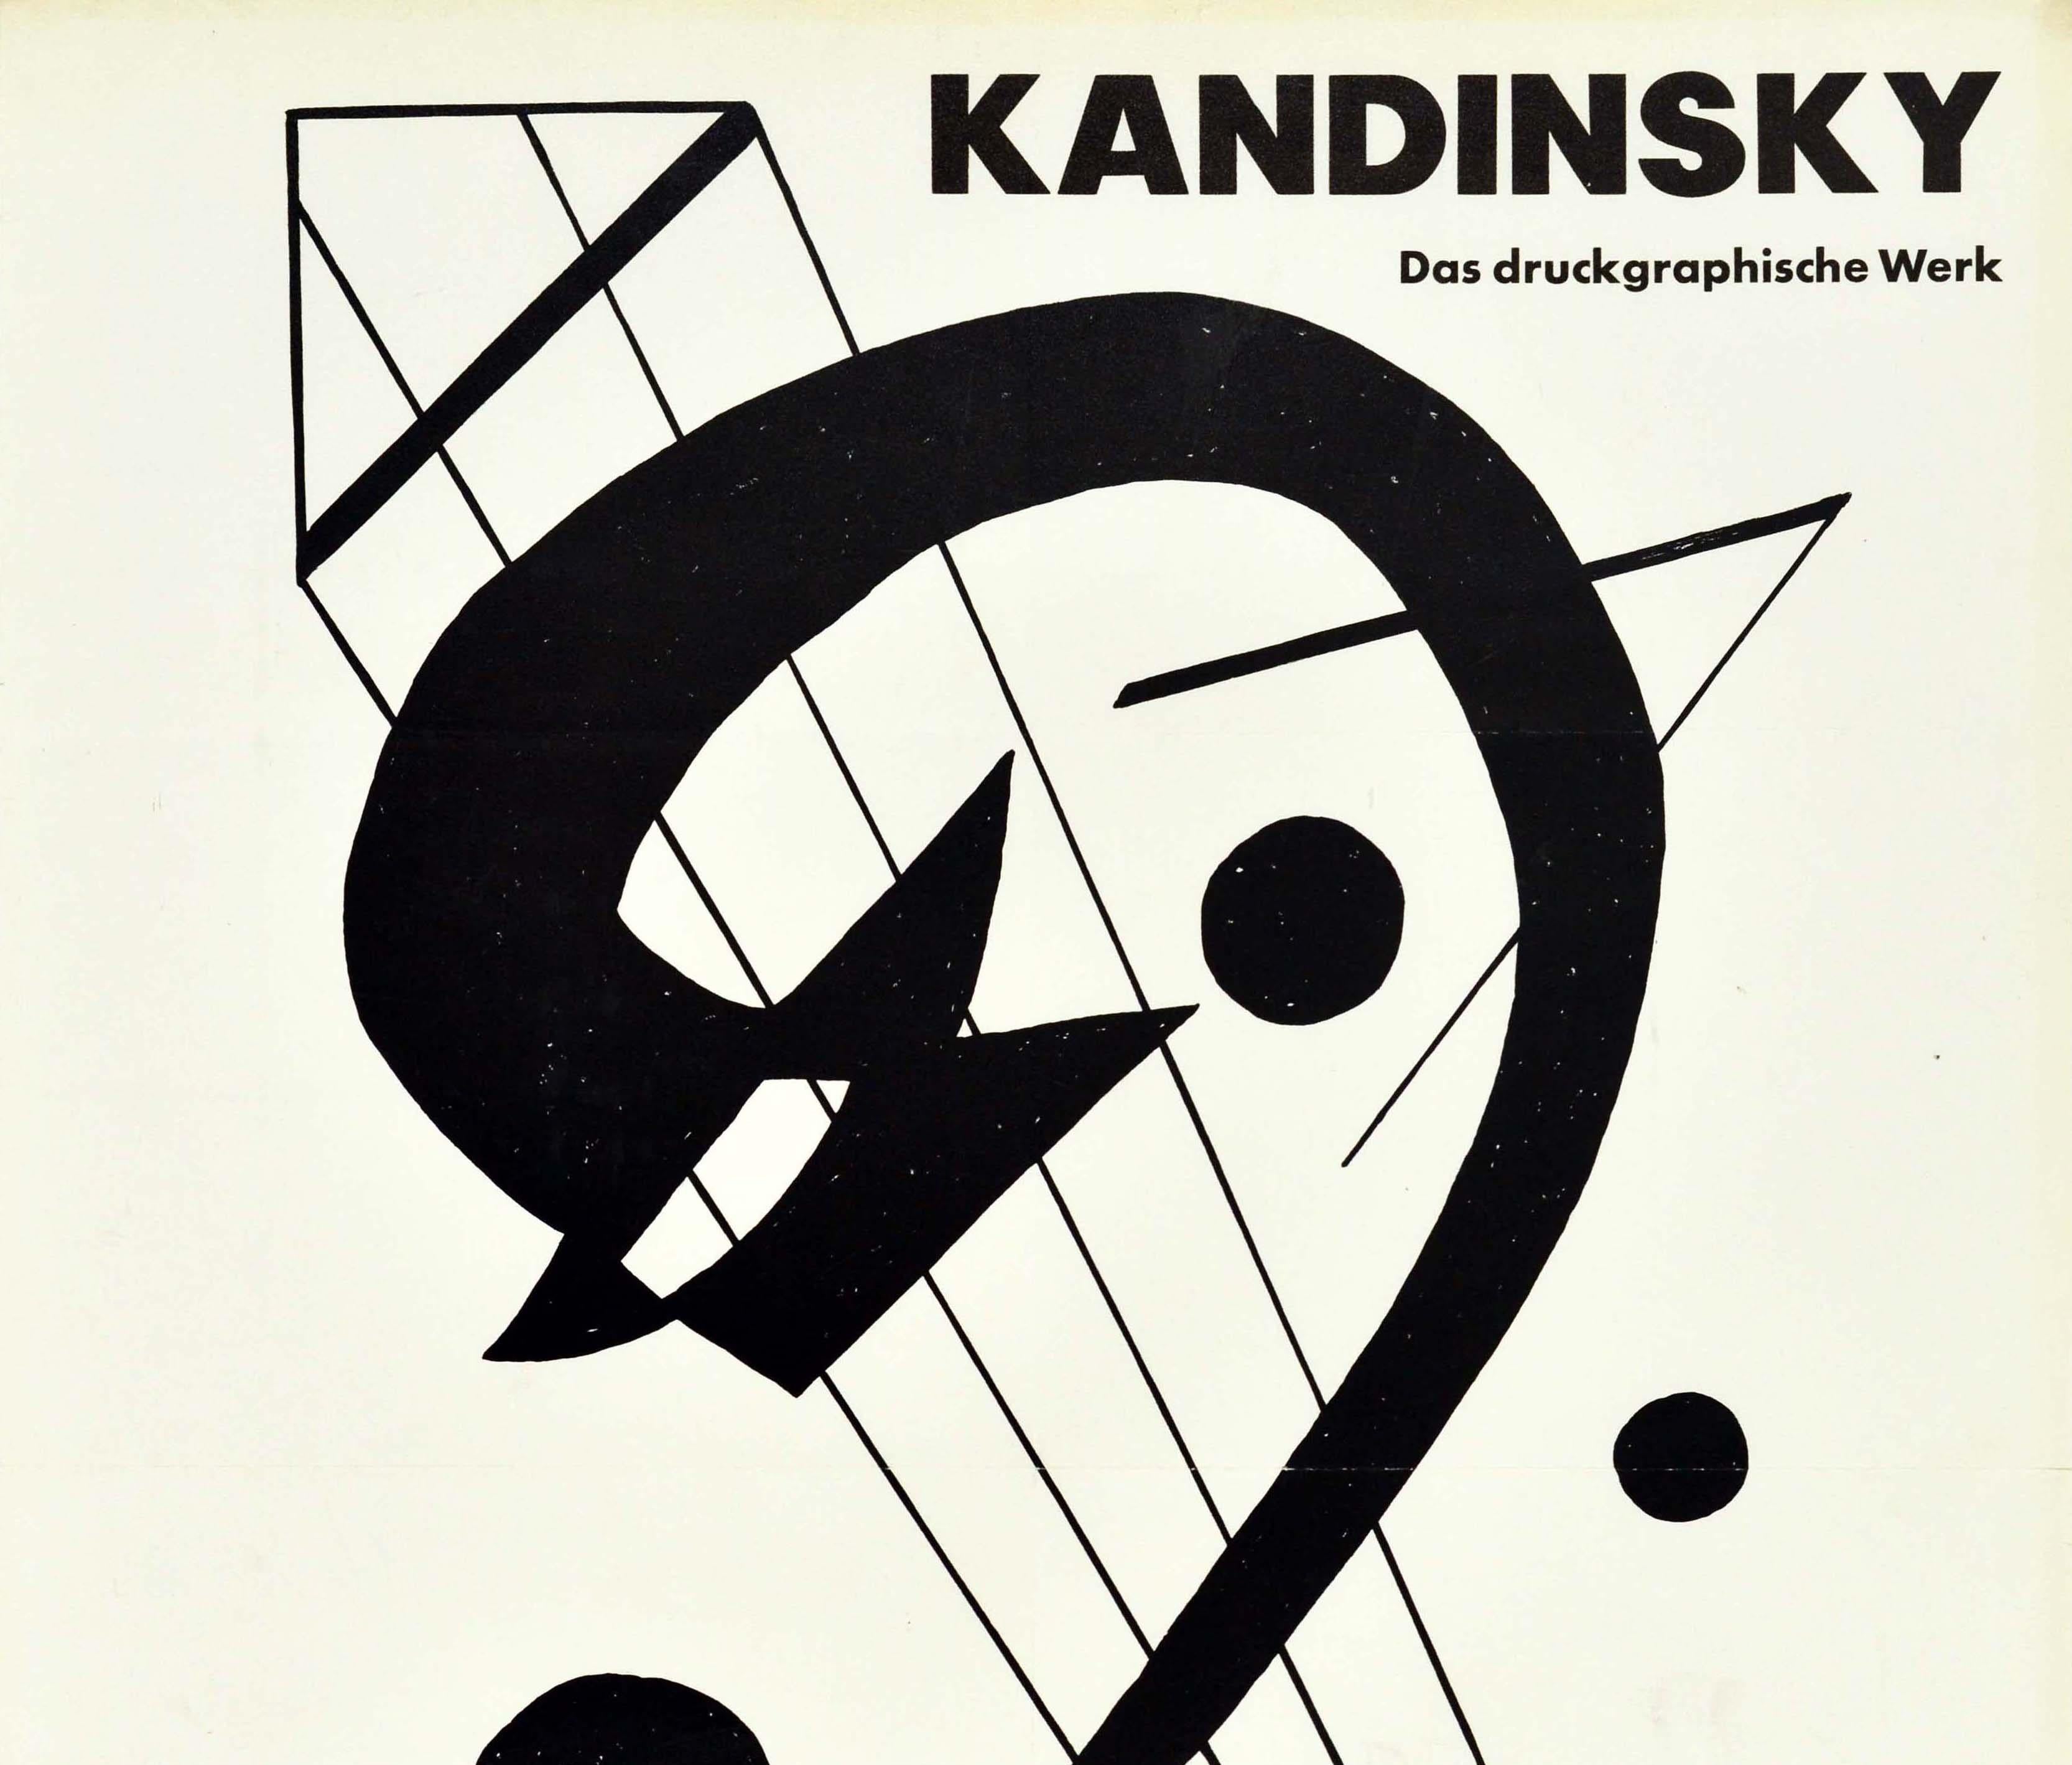 Original vintage advertising poster for an exhibition of graphic works by the notable abstract artist Wassily Kandinsky (1866-1944) held at the Stadtische Gallery in Lenbachhaus Munich from 2 July to 6 December 1966 to commemorate the 100th